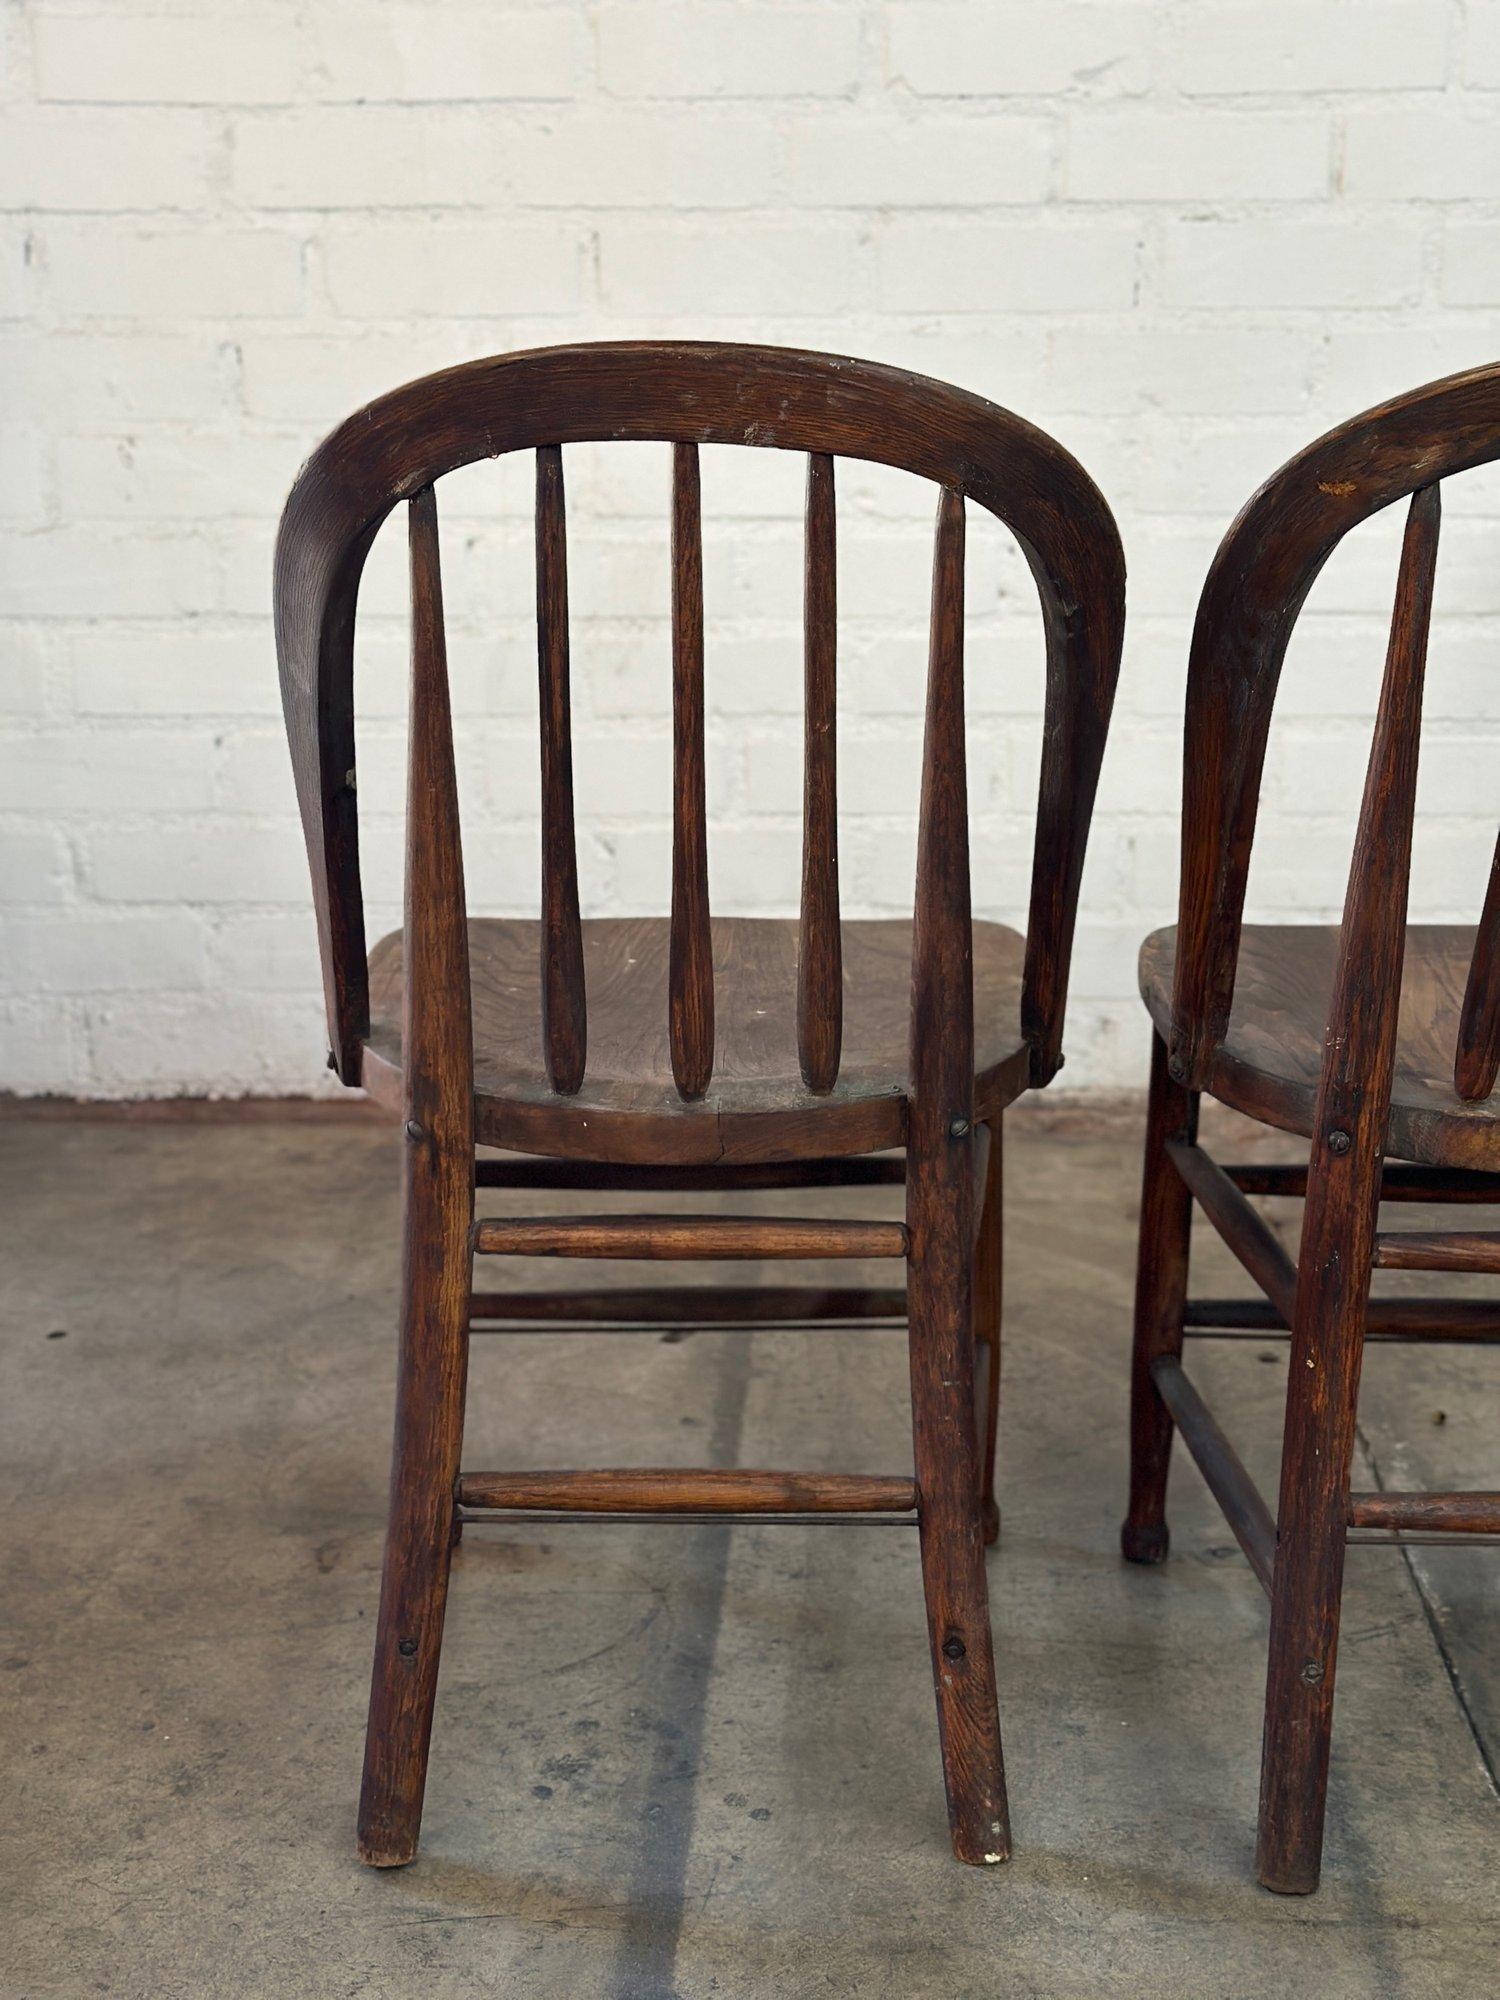 Vintage Farmhouse Spindle Chairs 2